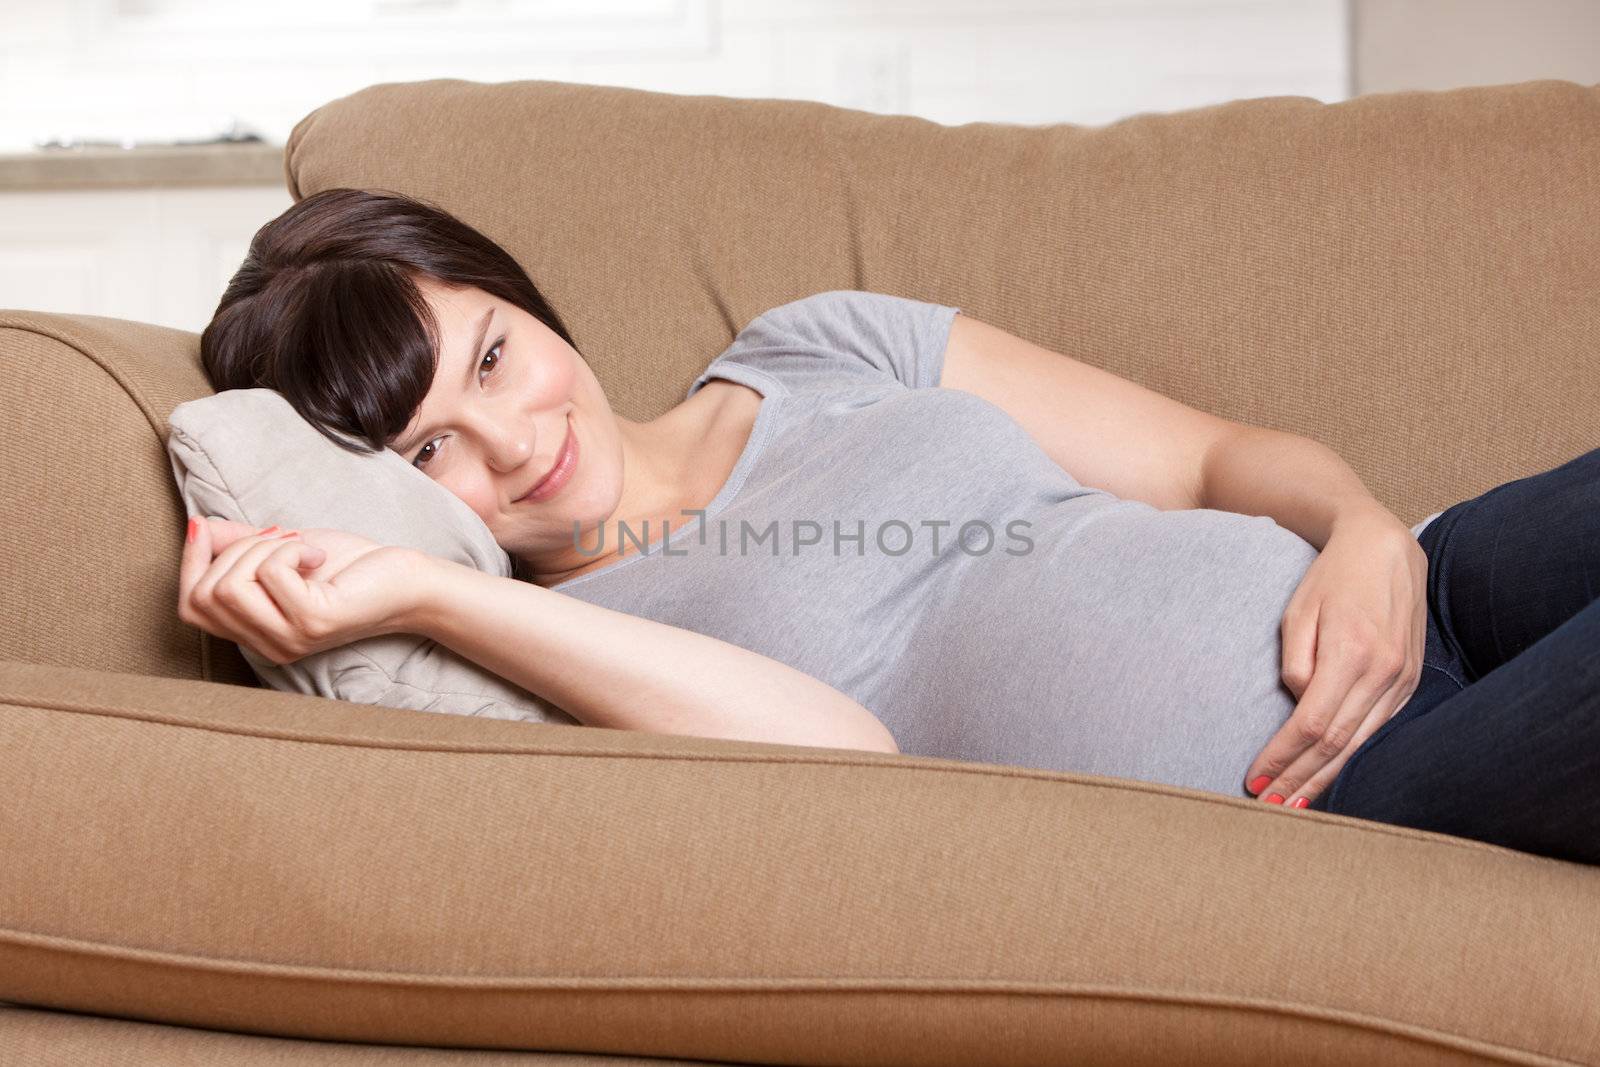 Pregnant Woman on Couch by leaf